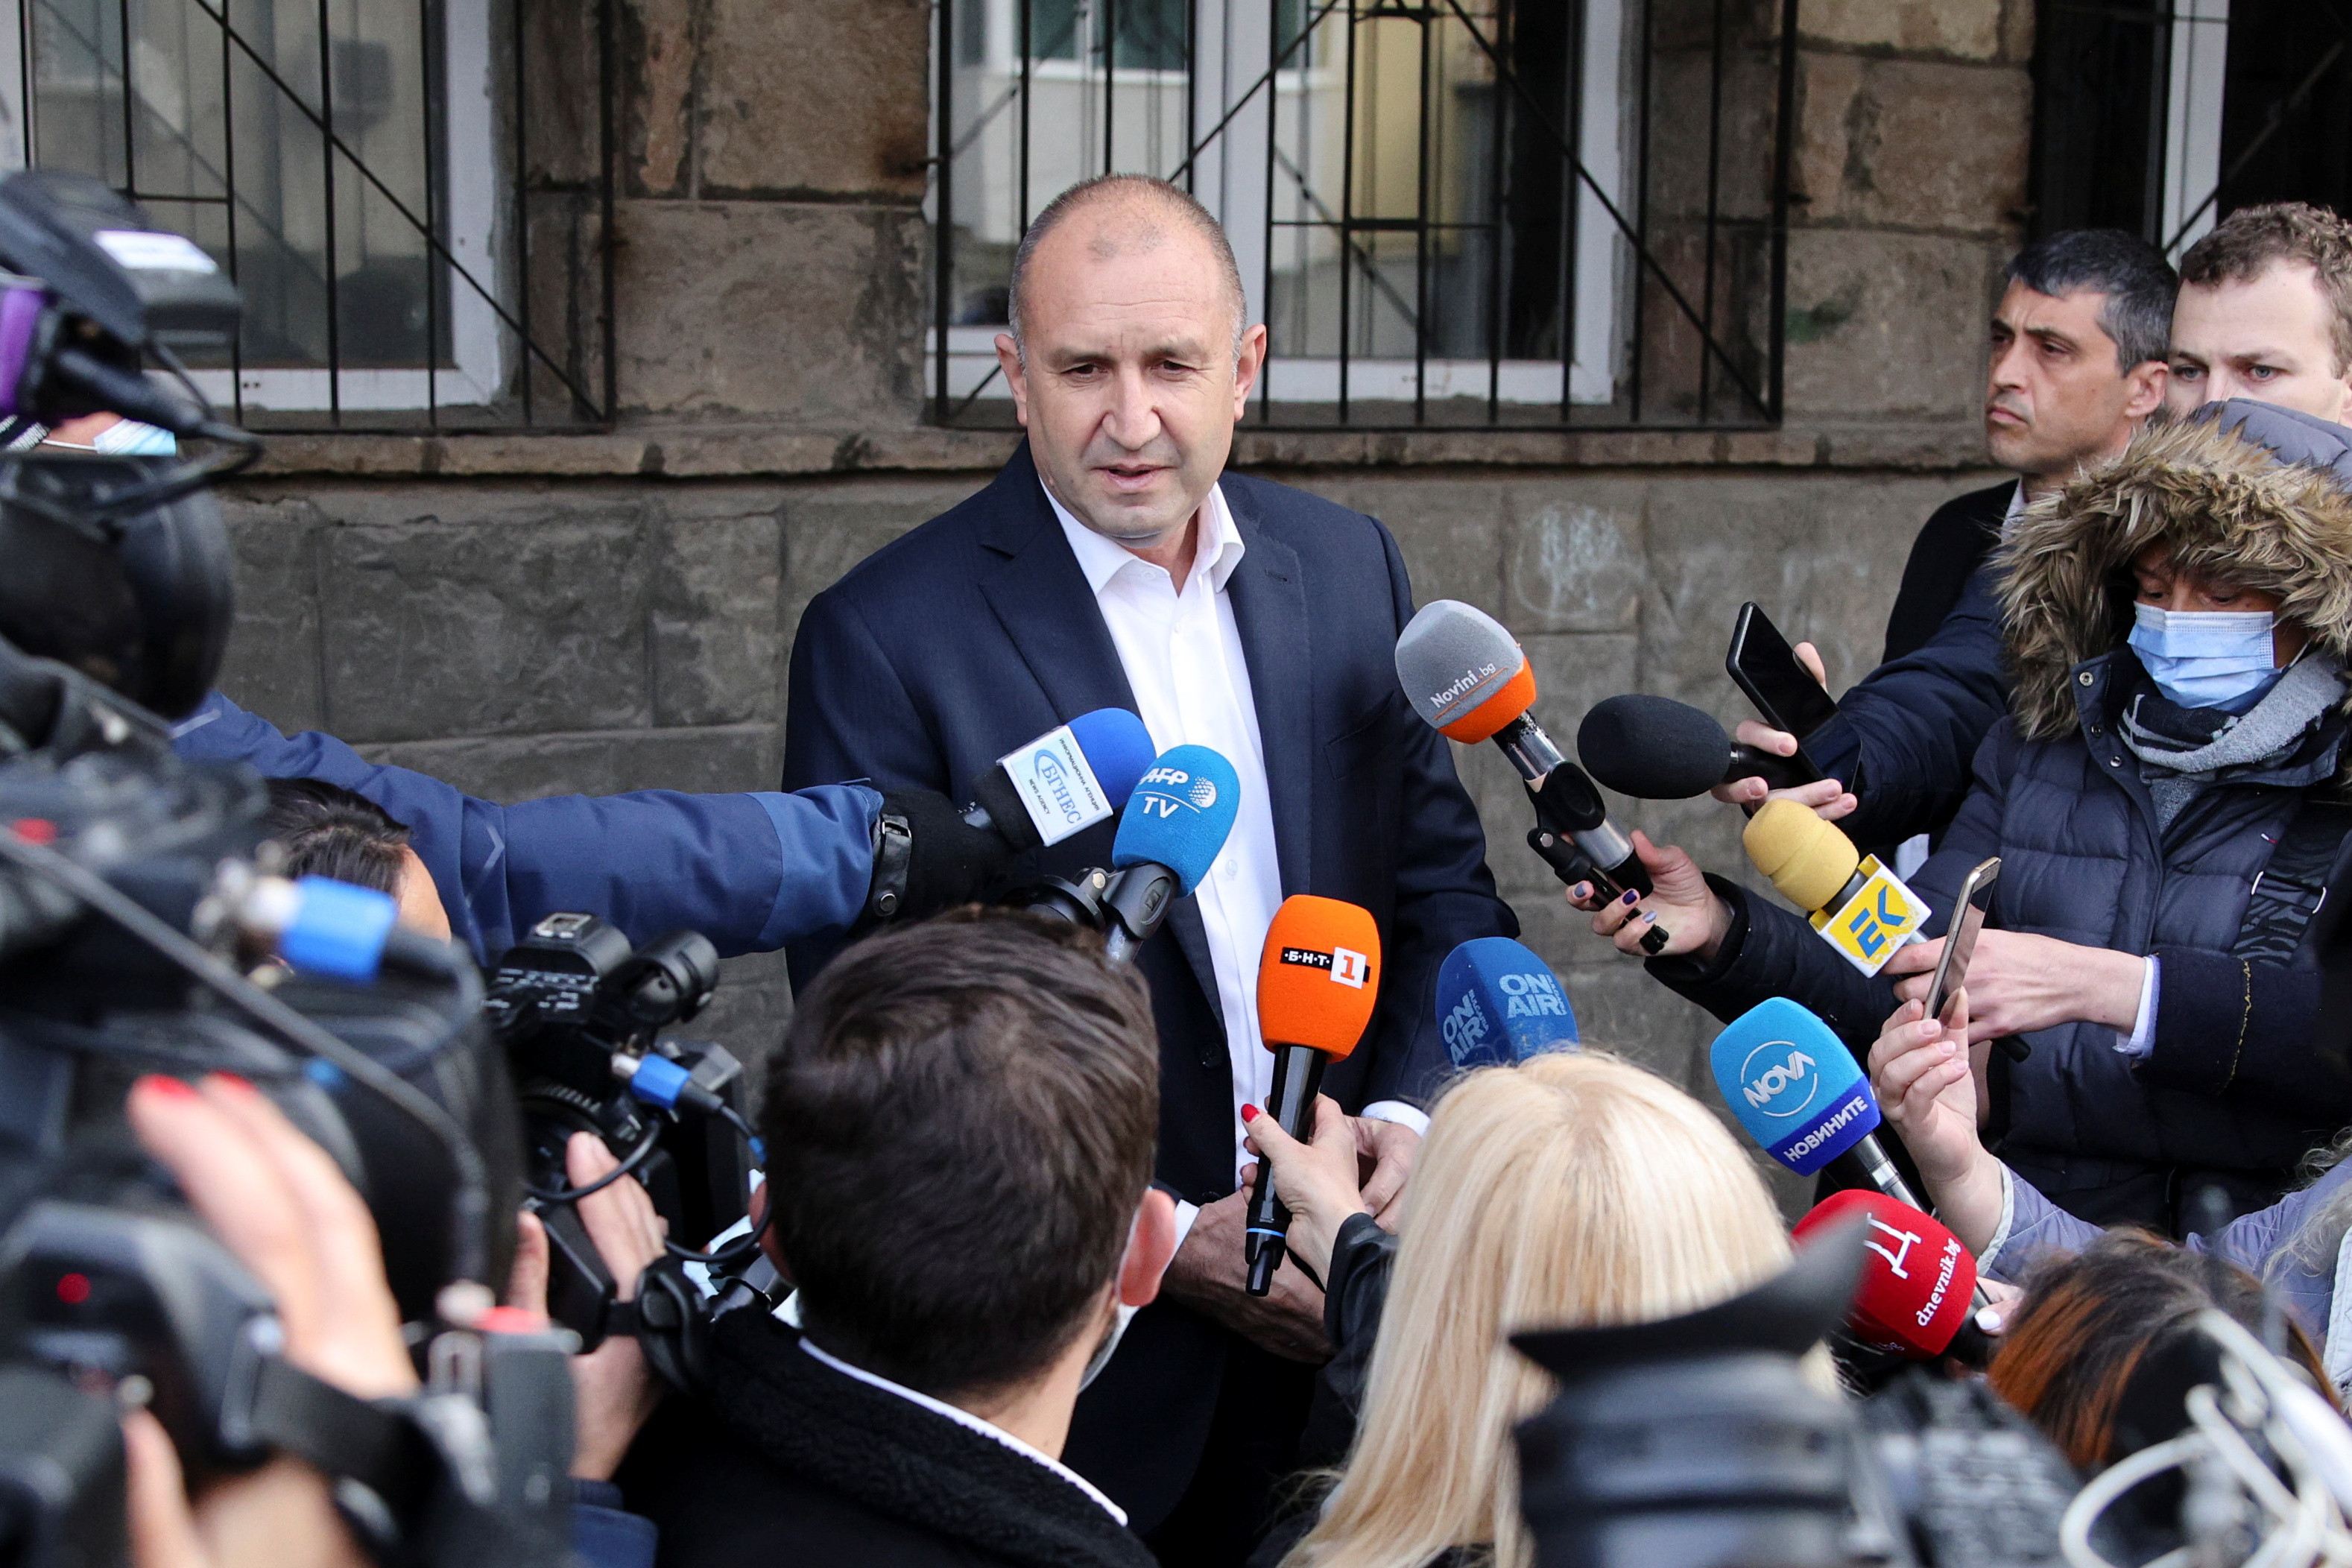 Incumbent President Rumen Radev speaks to the media after casting his vote at a polling station during a run-off of the presidential election, in Sofia, Bulgaria, November 21, 2021. REUTERS/Stoyan Nenov